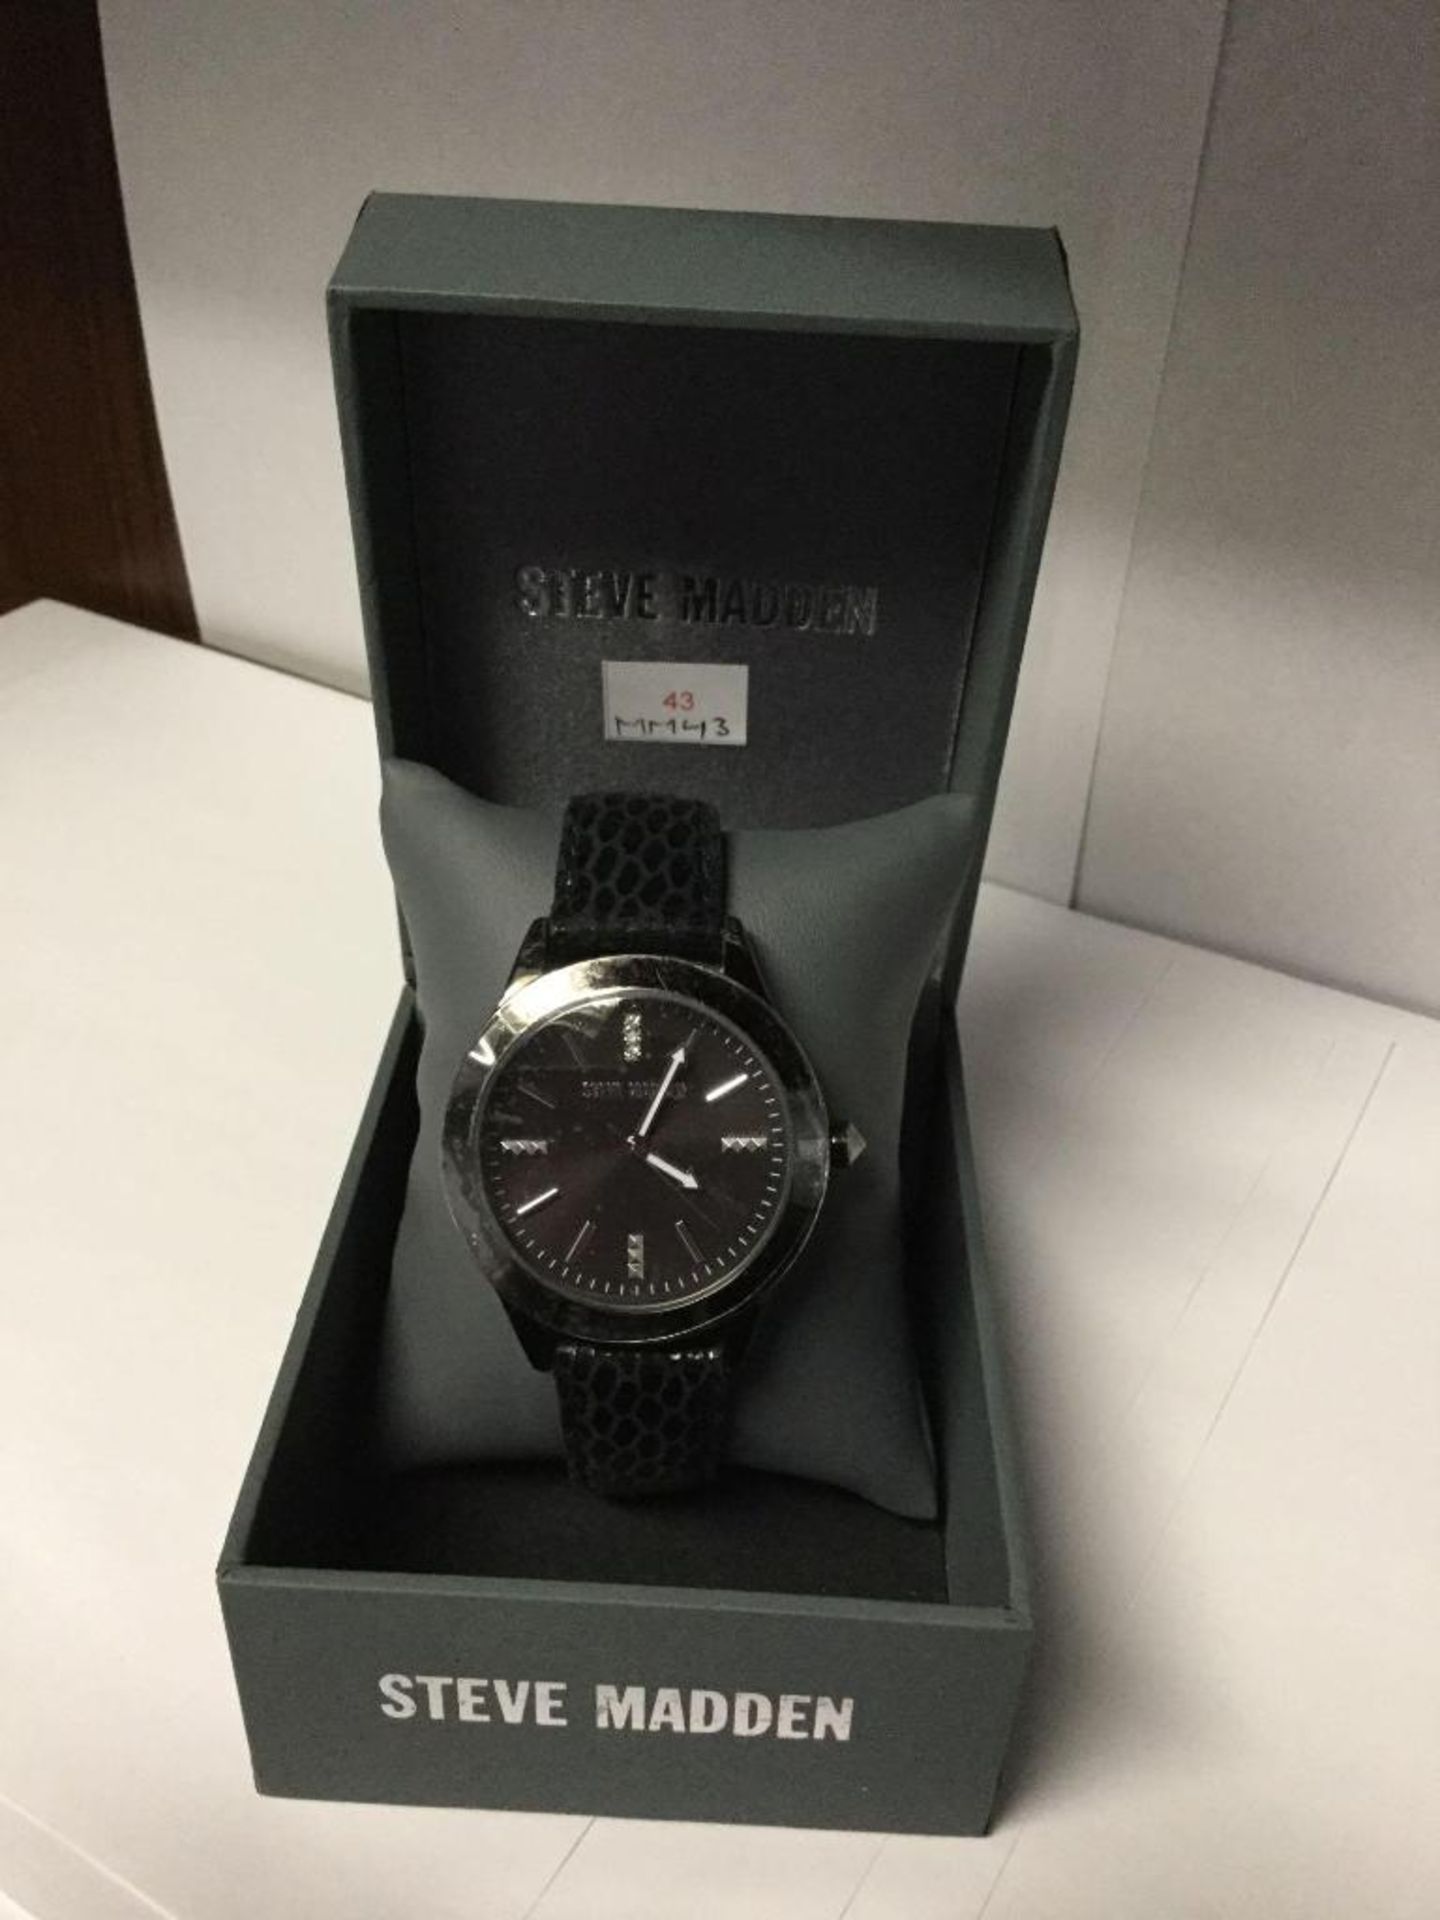 Steve Madden Watch, Black Face and leather band,comes with Case